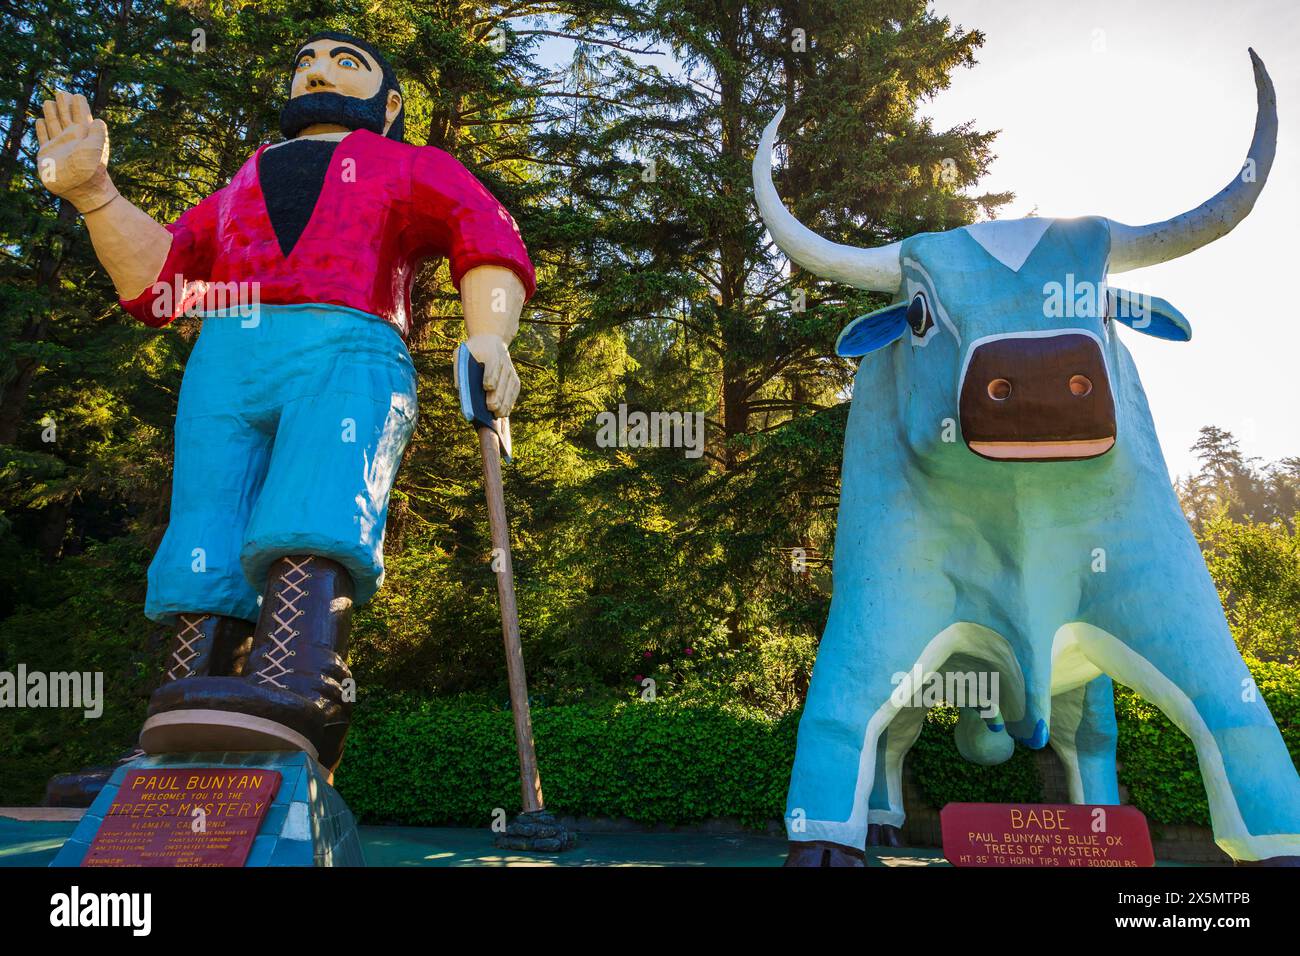 Paul Bunyan and ox Babe statues at Trees of Mystery roadside attraction, Klamath, California, USA. (Editorial Use Only) Stock Photo